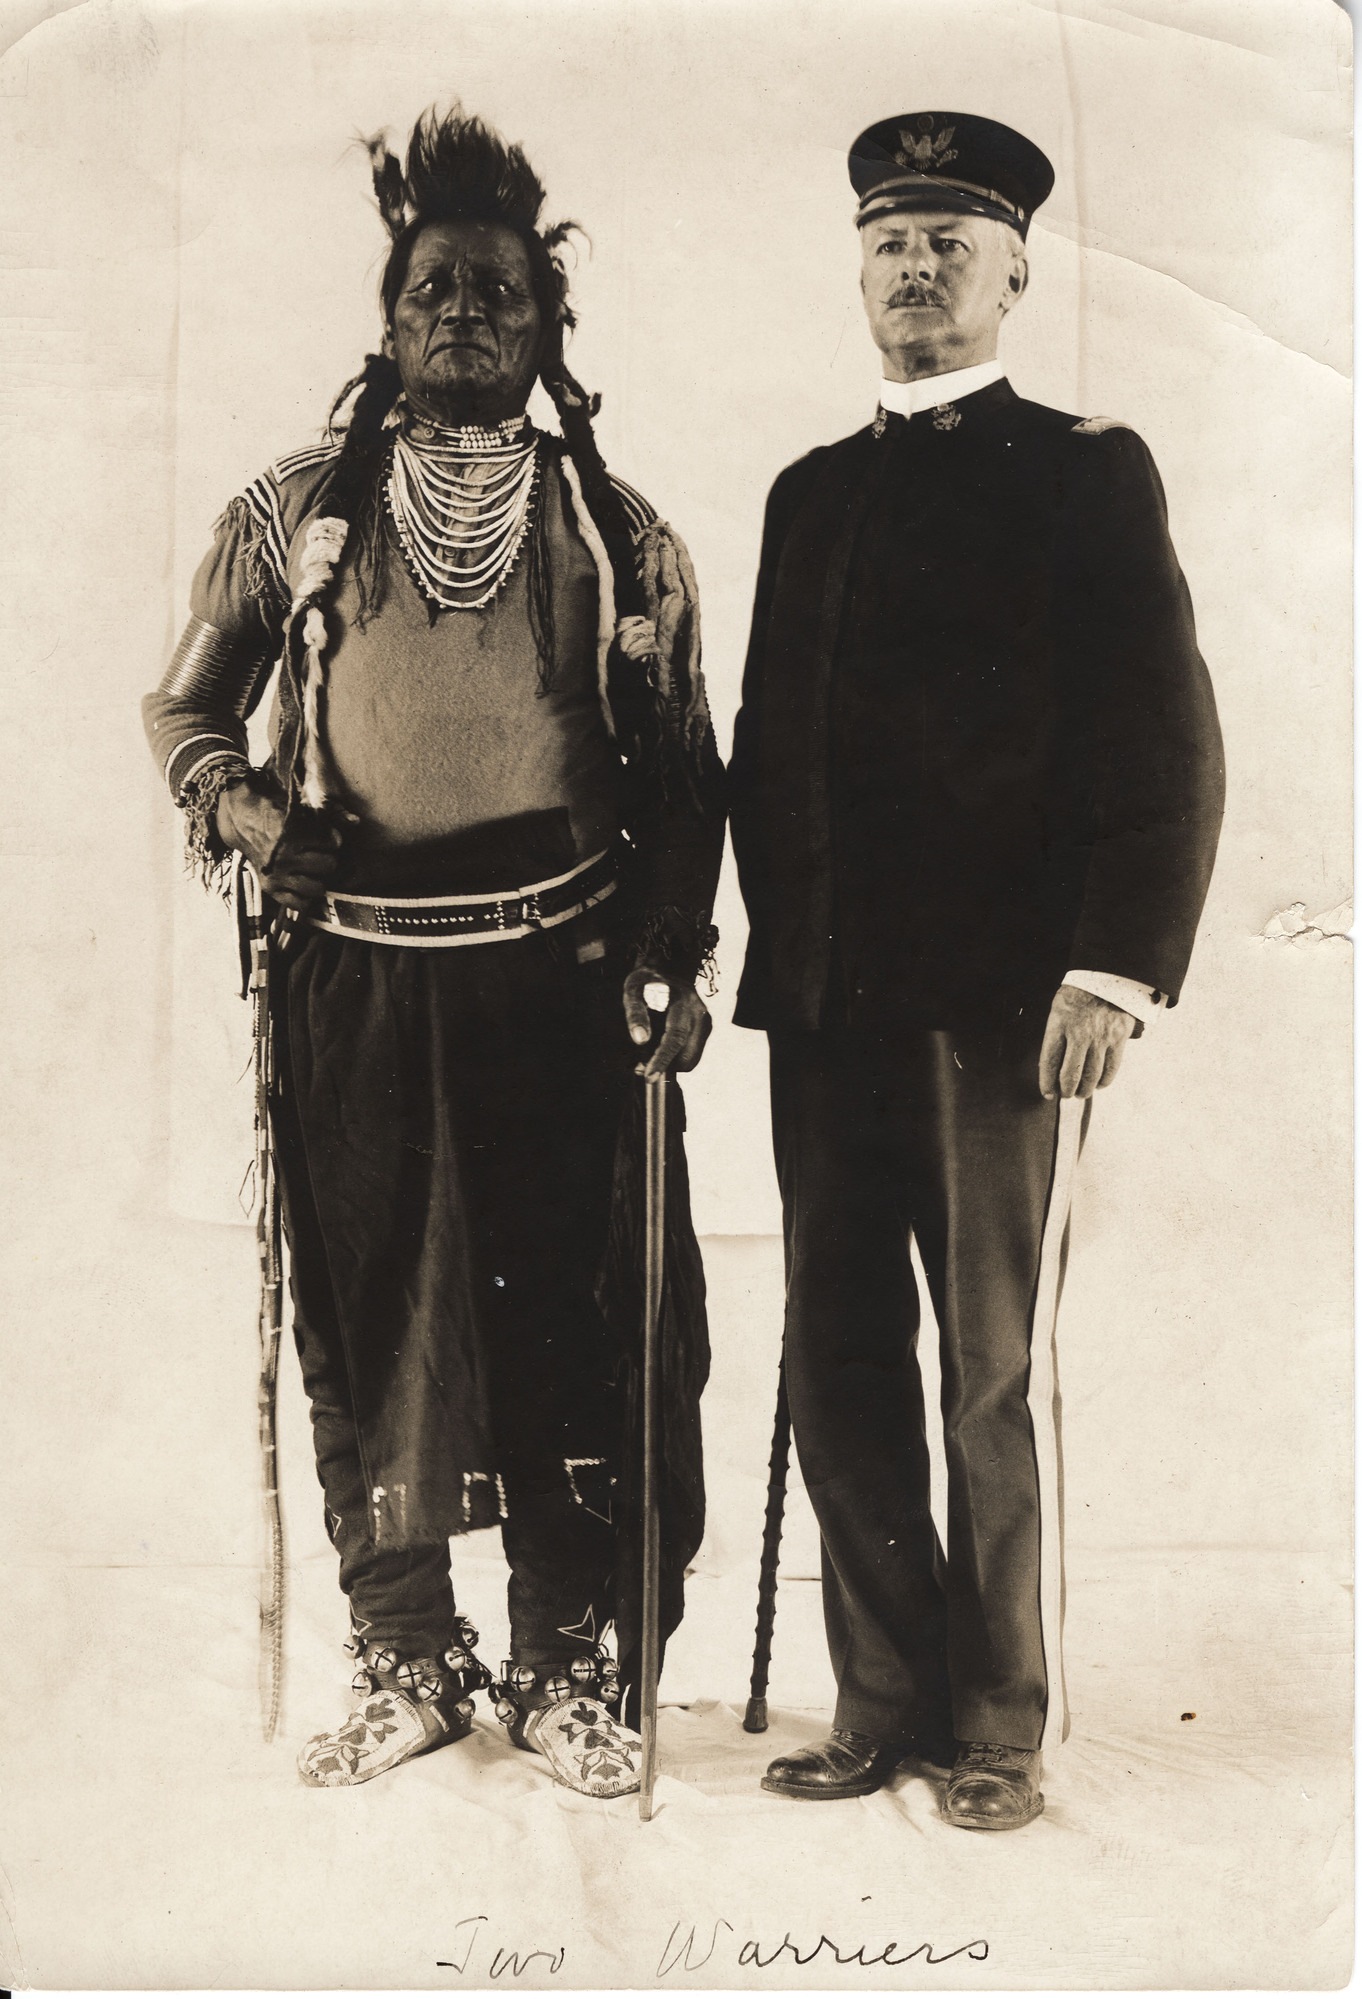 Black and white photograph of an American Indian man and a White man in uniform standing for a portrait